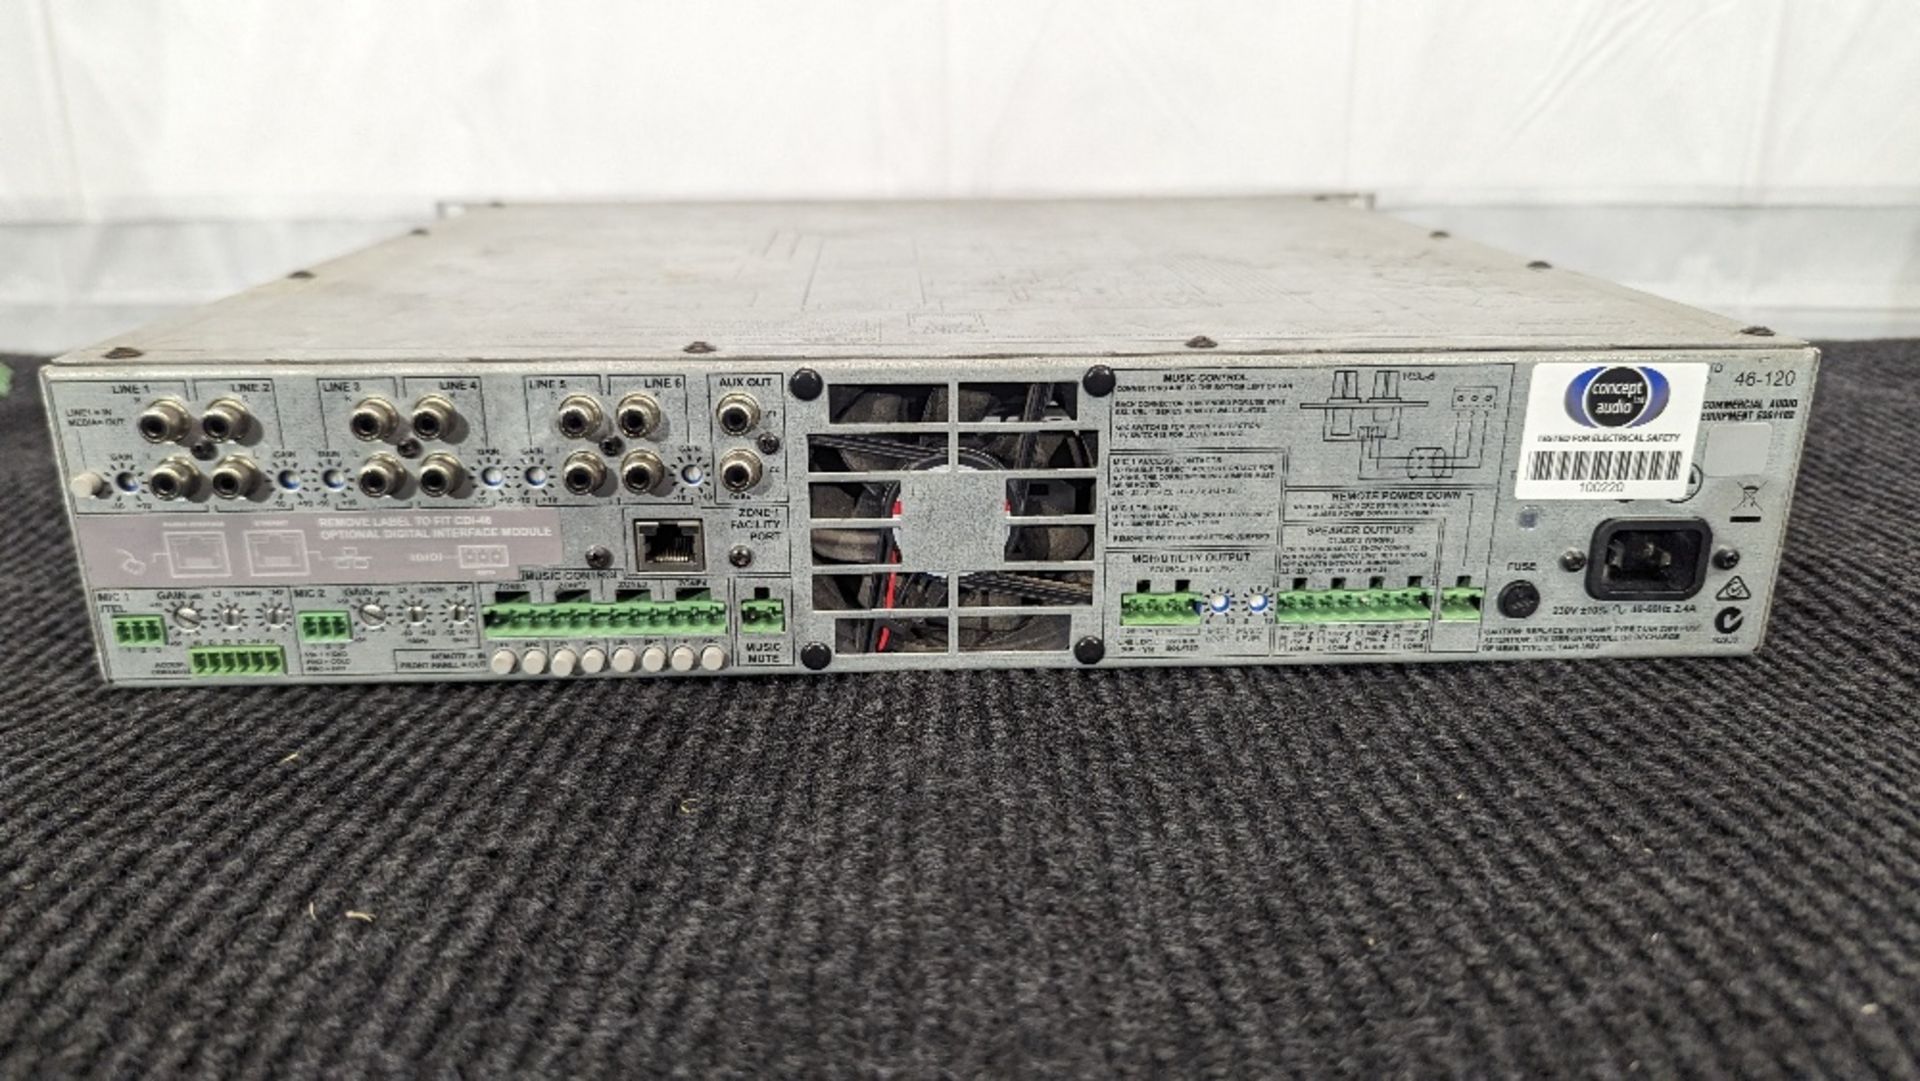 Cloud 46-120 Media 4-Zone 120W Integrated Mixer Amplifier - Image 4 of 4